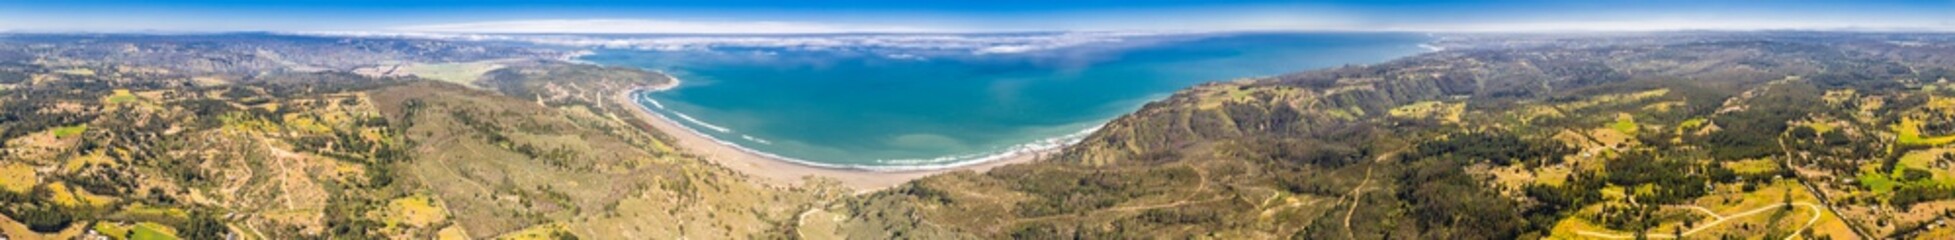 Amazing aerial view of central Chilean coastline with at Puertecillo. A rugged landscape from the ground down to the cliffs and the amazing and wild sea. Awe sunny day with clouds in the far horizon